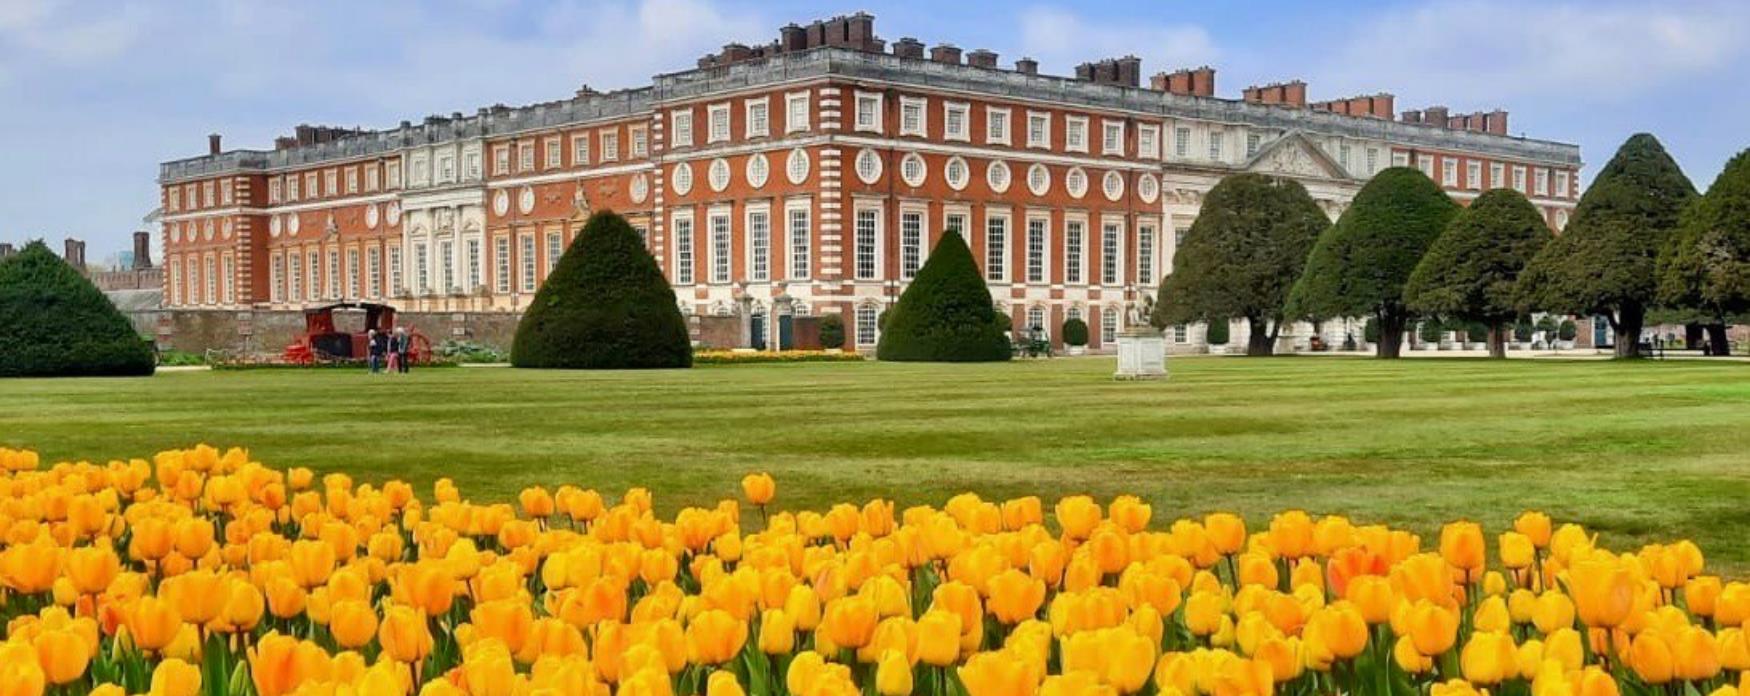 A picture of Hampton Court Palace